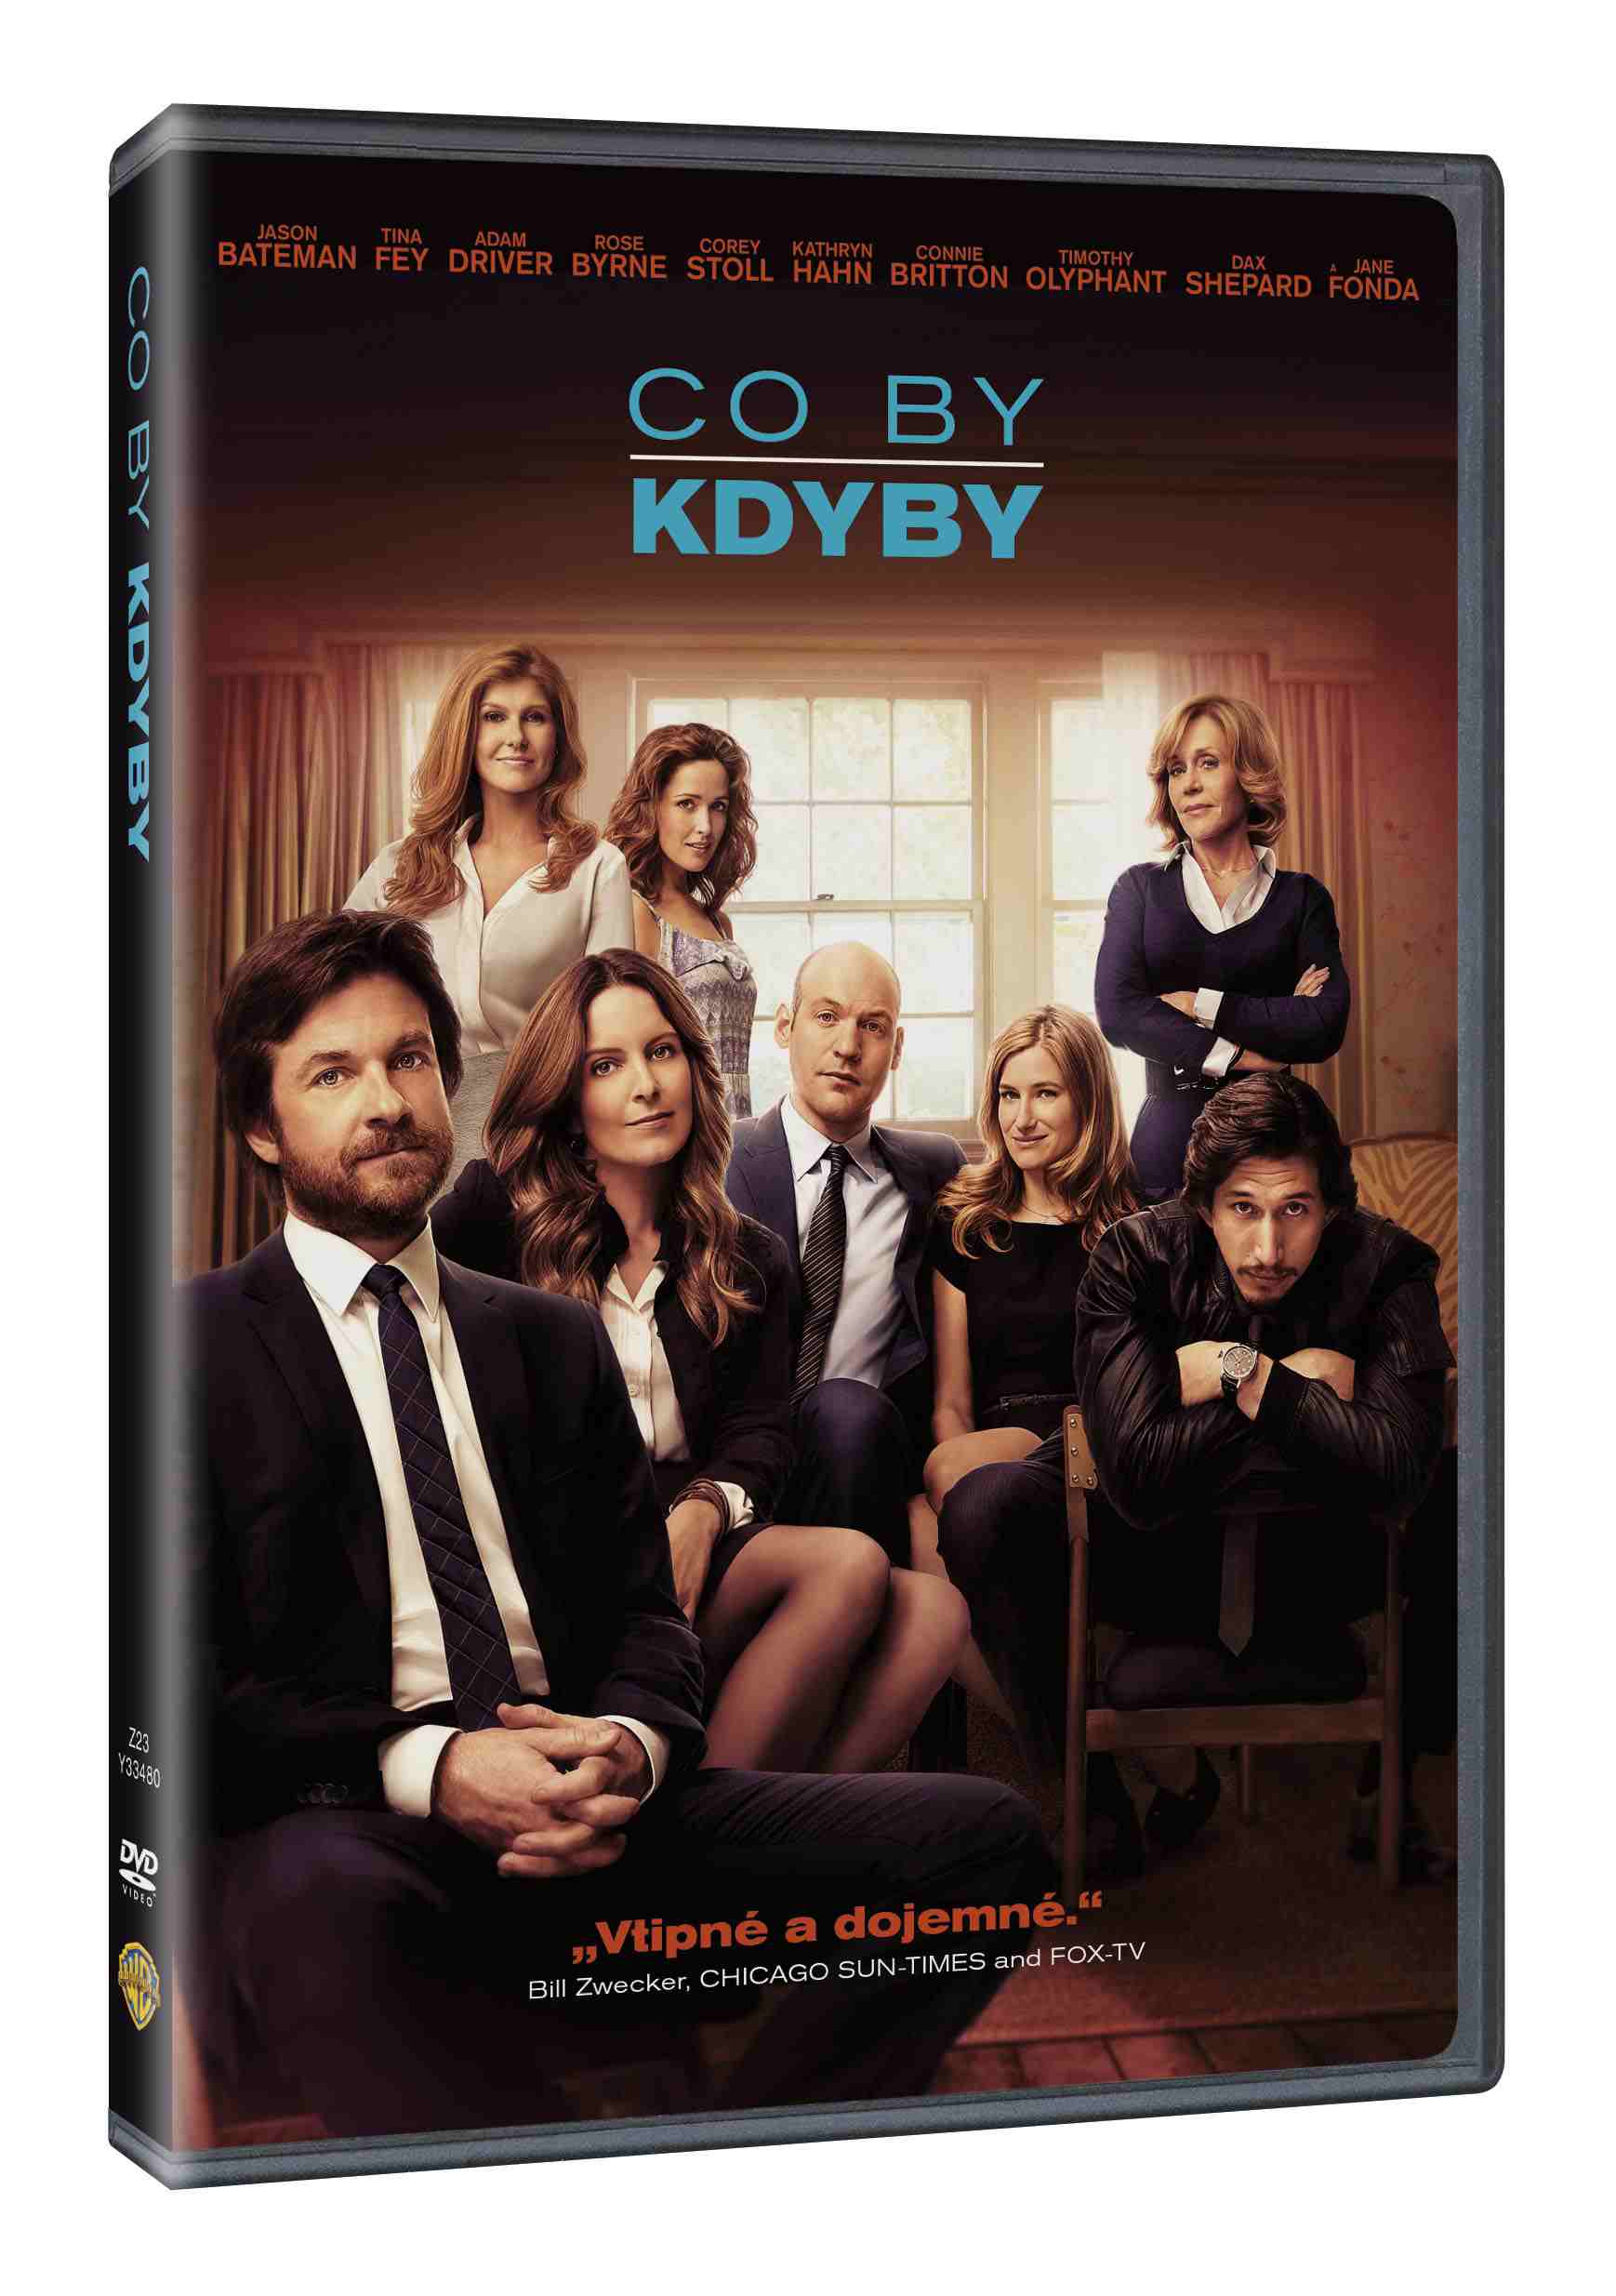 Co by kdyby - DVD